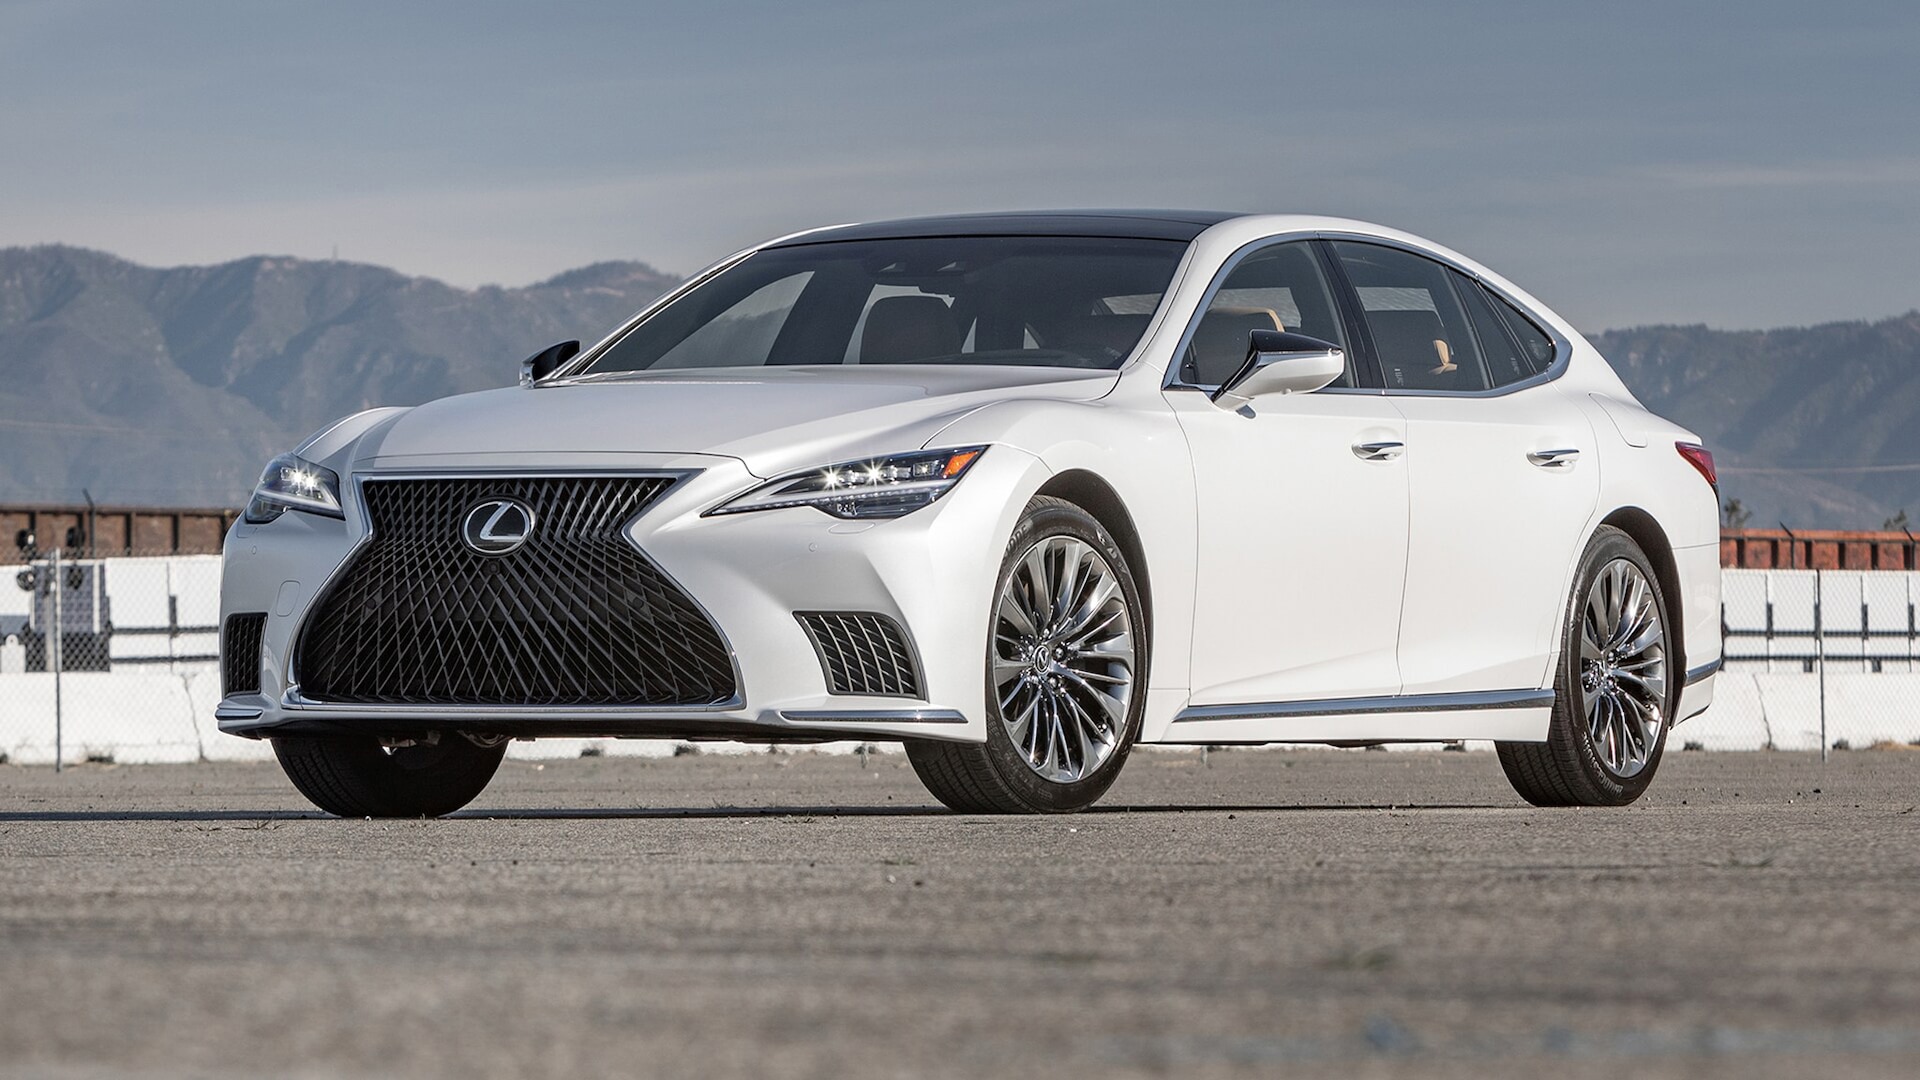 2022 Lexus LS Prices, Reviews, and Photos - MotorTrend